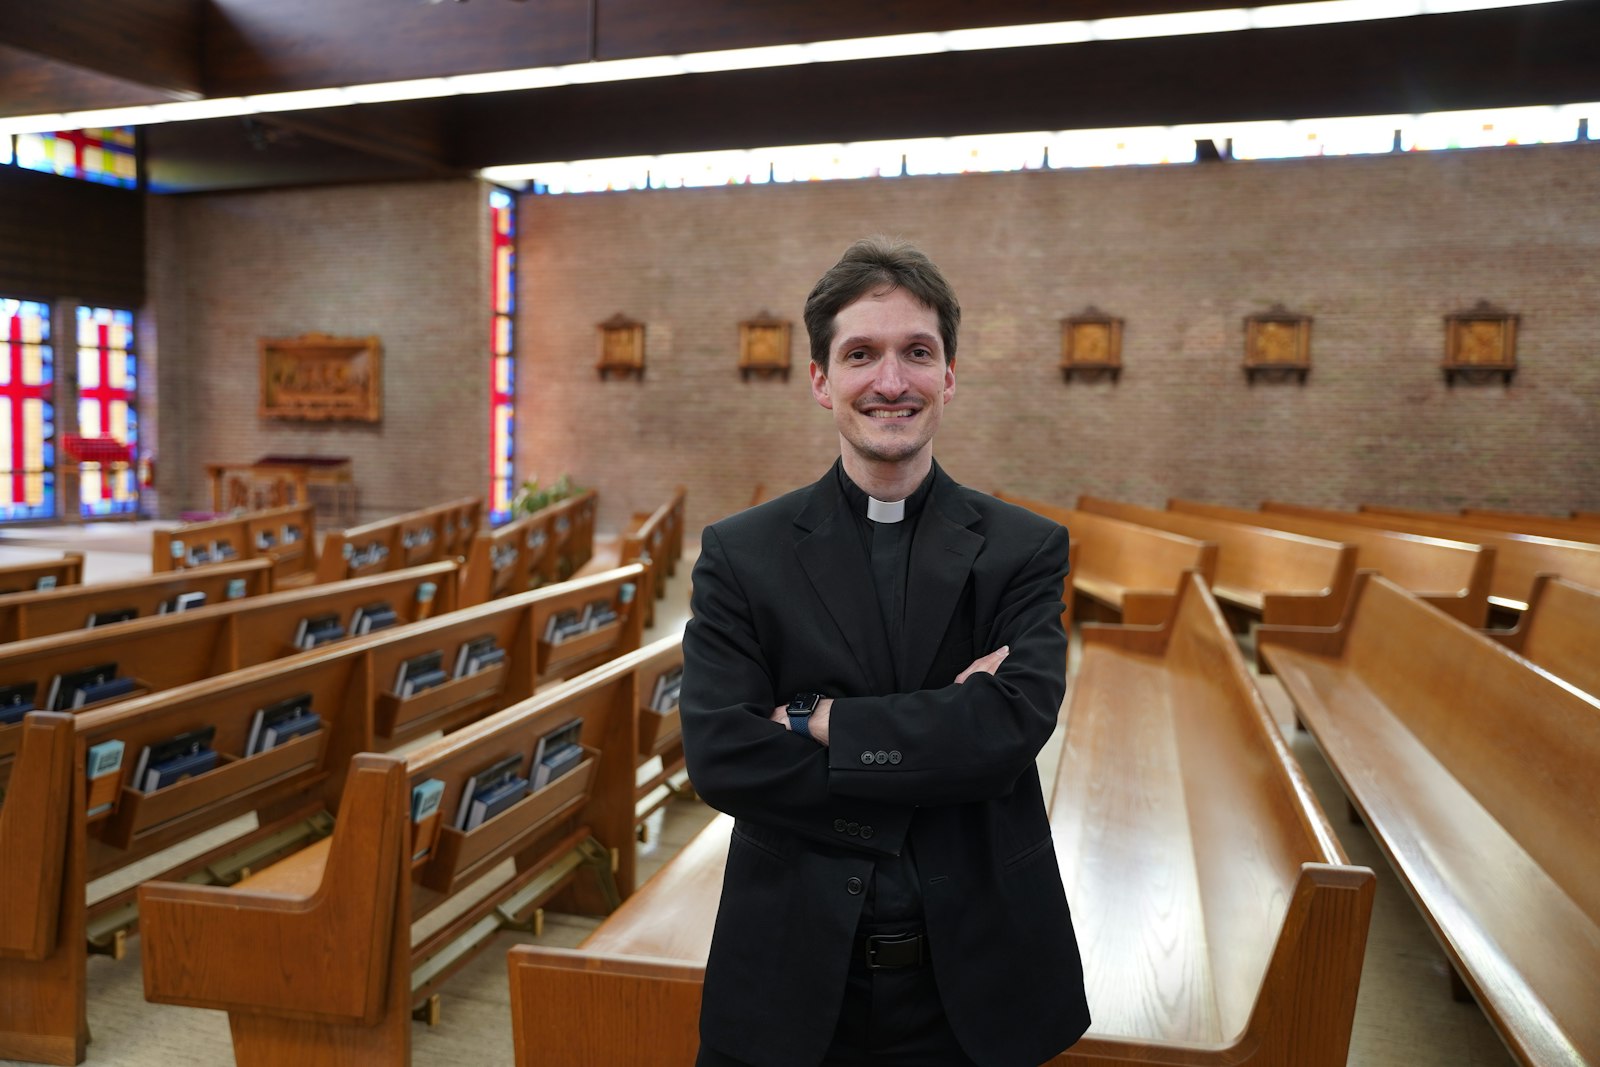 Despite entering the seminary while in college, Fr. Bryan Shackett of St. Anthony Parish in Belleville wasn't sure the priesthood was for him. But after praying and discerning with the help of the archdiocese's vocations director, Fr. Shackett overcame his doubts and learned to trust God's promise for his life.